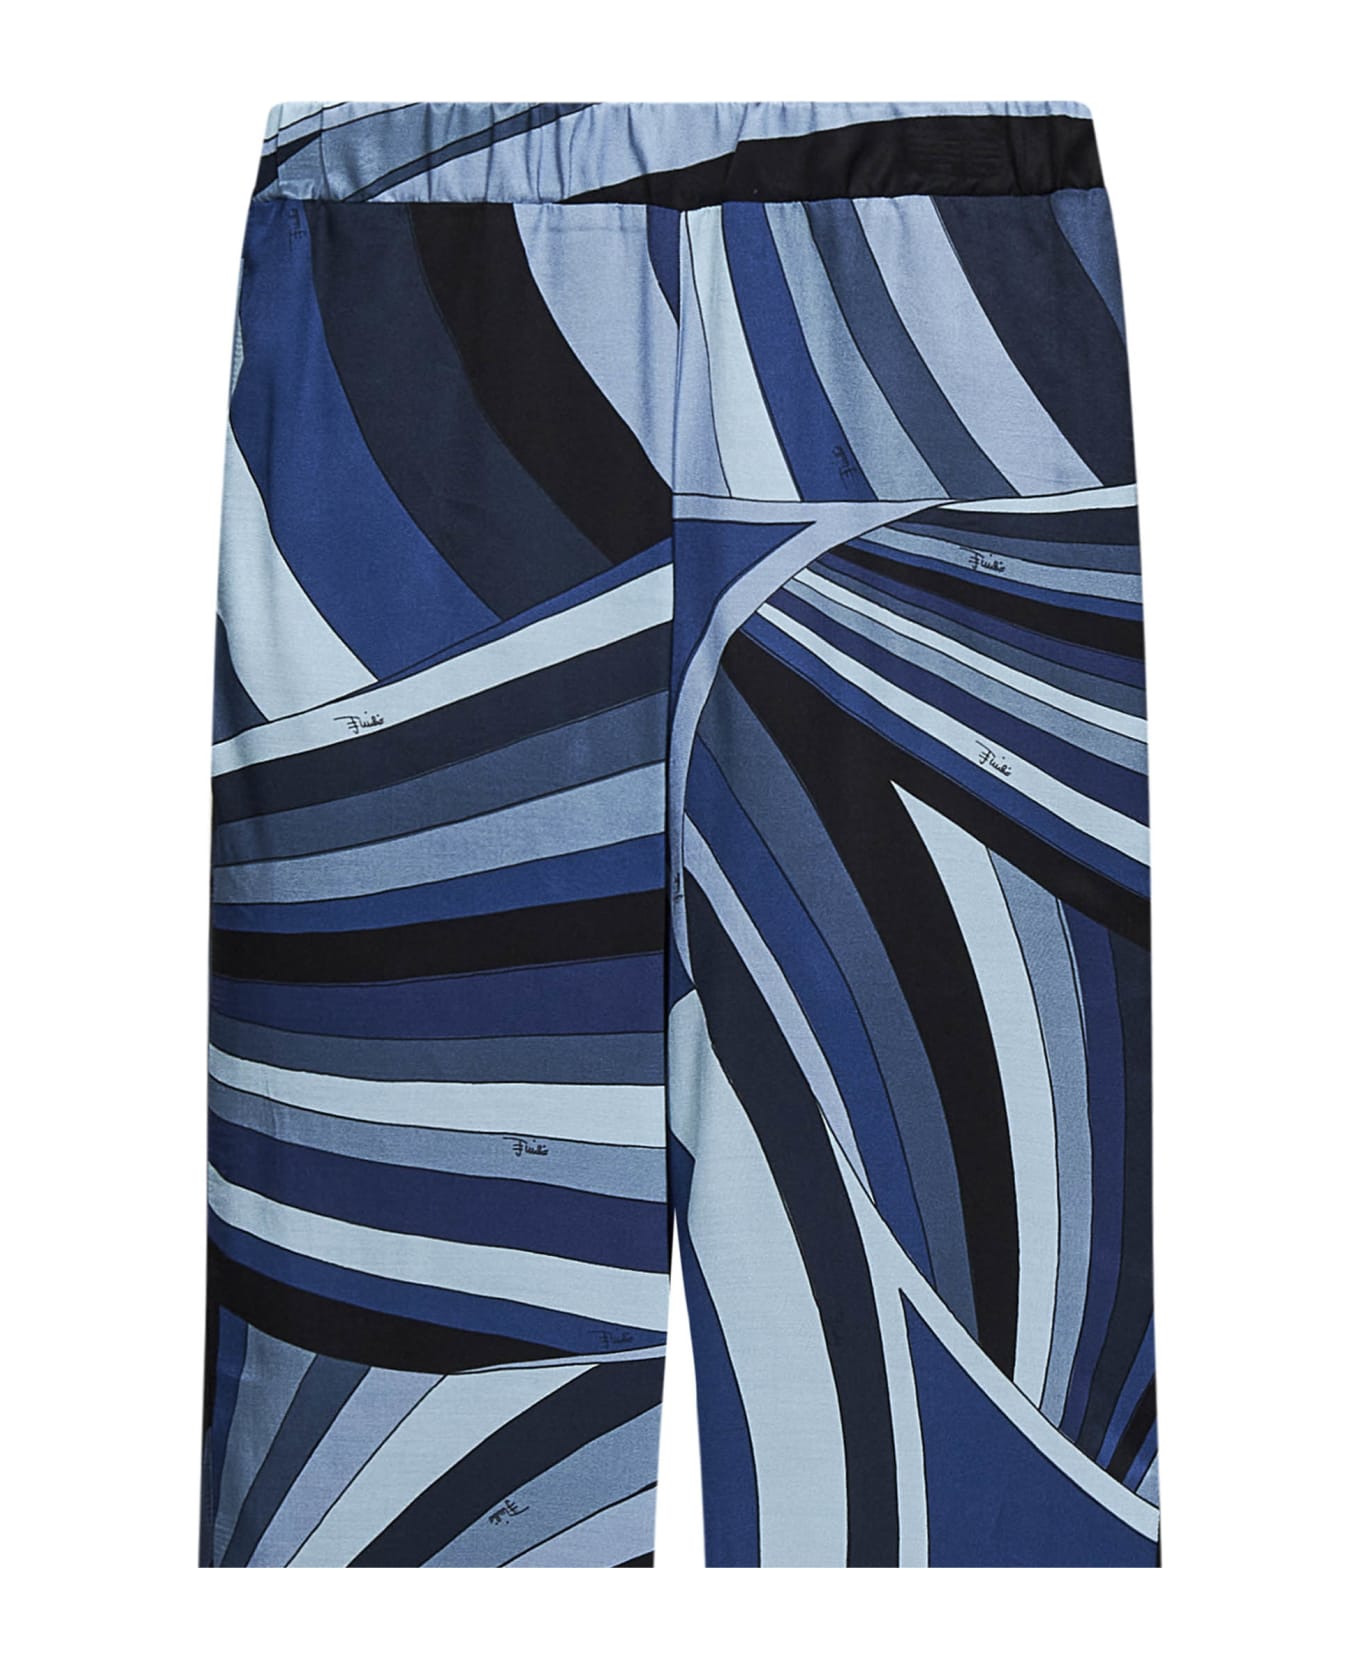 Pucci Trousers - Blue